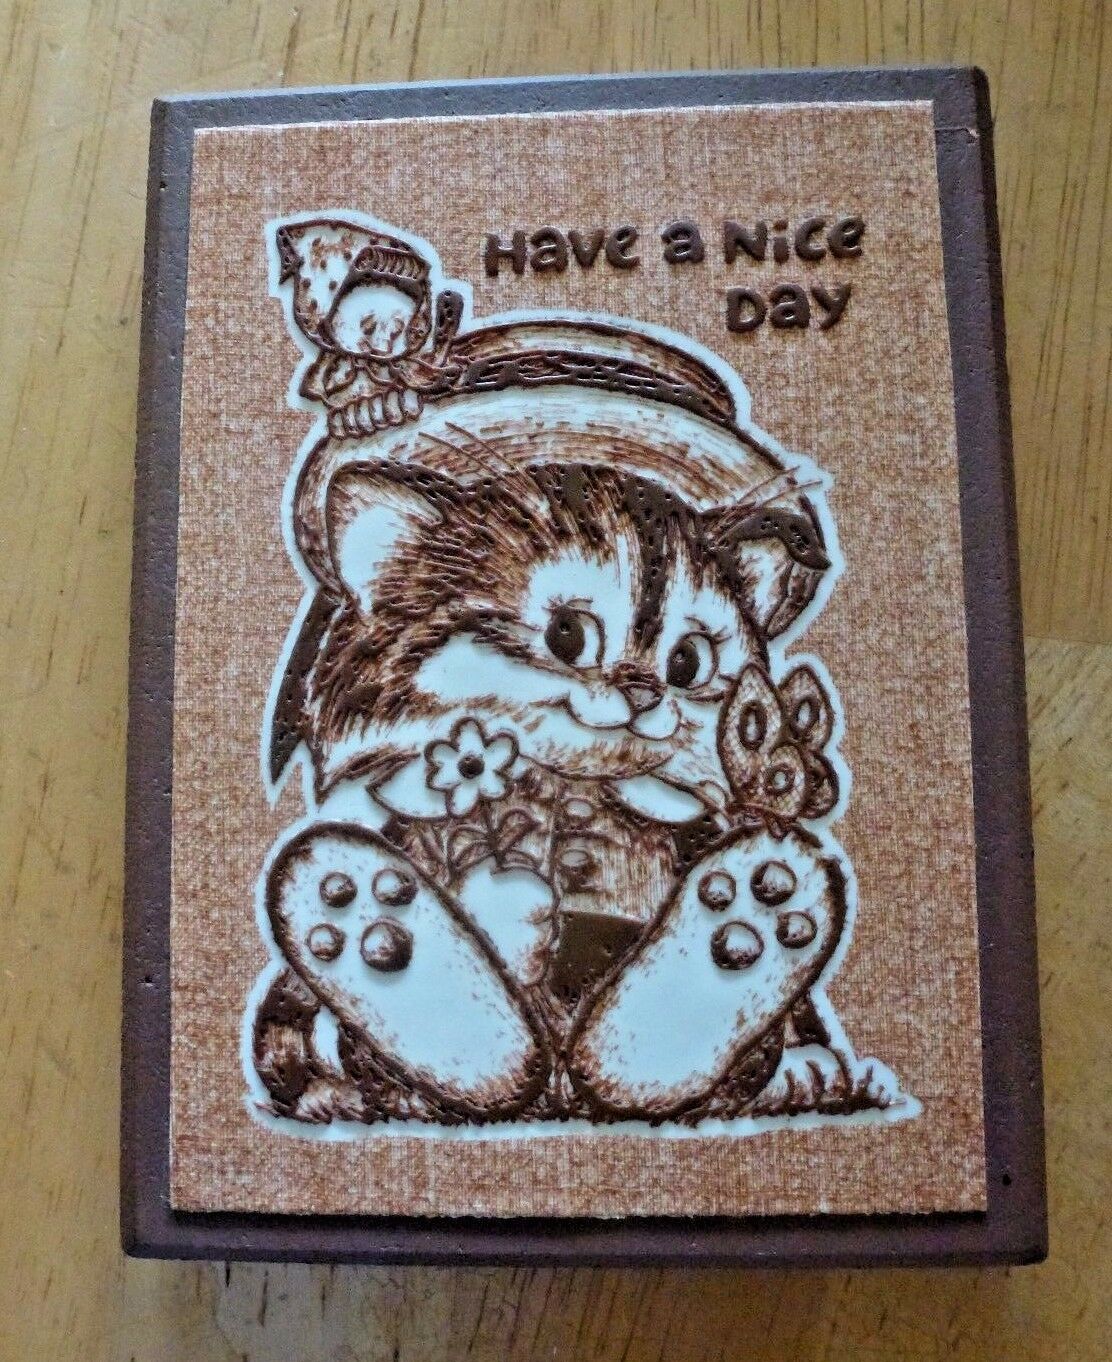 American Greeting Have A Nice Day Kitten With Flowers Plaque Made In Usa 5"x3.5"